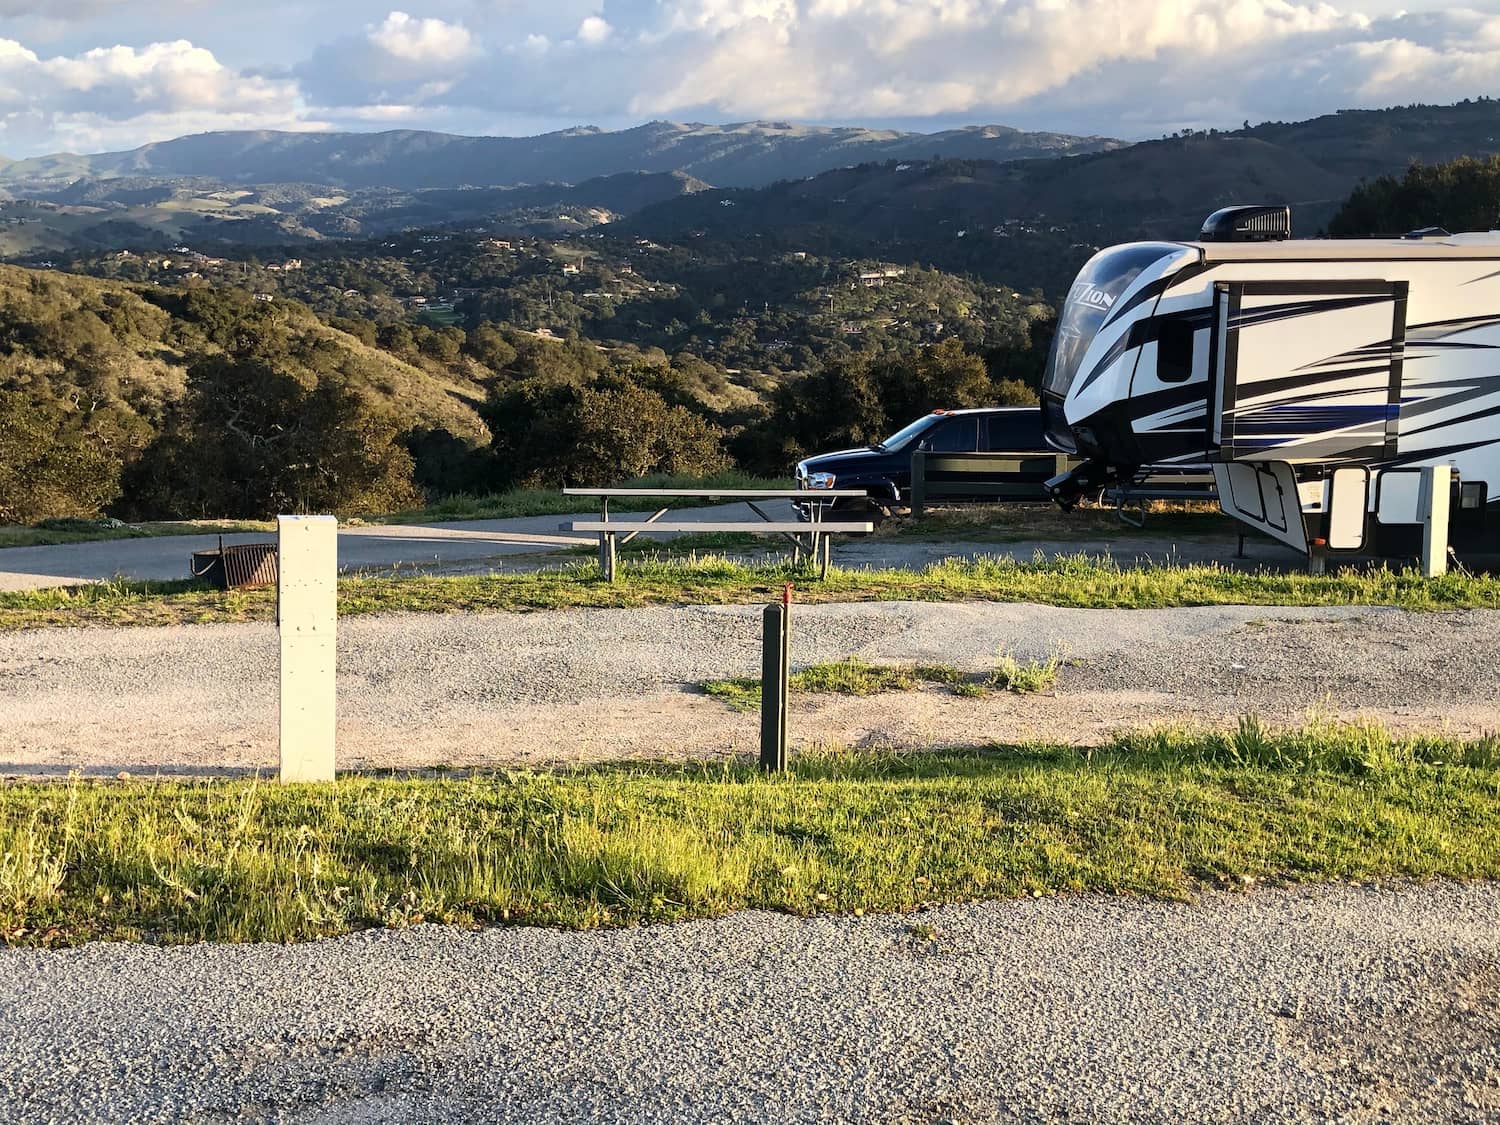 pull-behind parked at rv site with vista in background